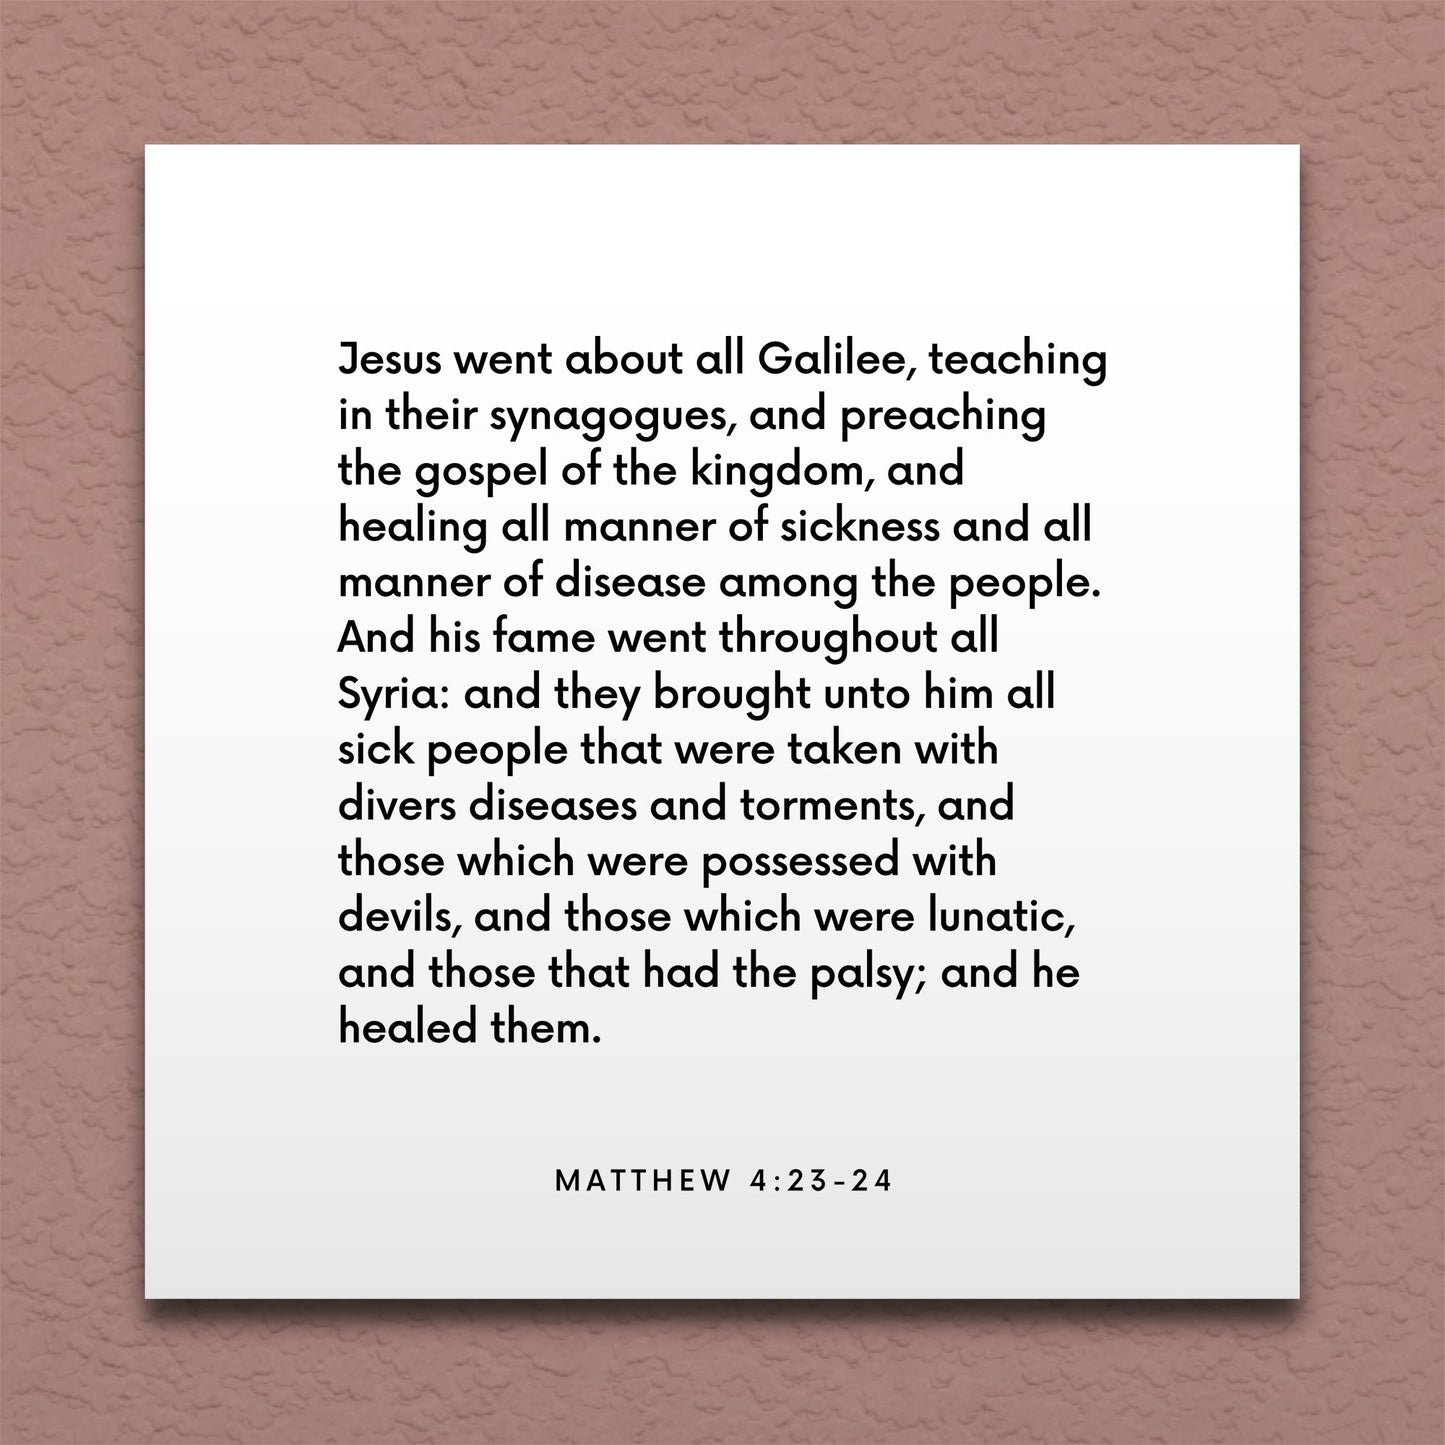 Wall-mounted scripture tile for Matthew 4:23-24 - "Jesus went about all Galilee, healing all manner of sickness"